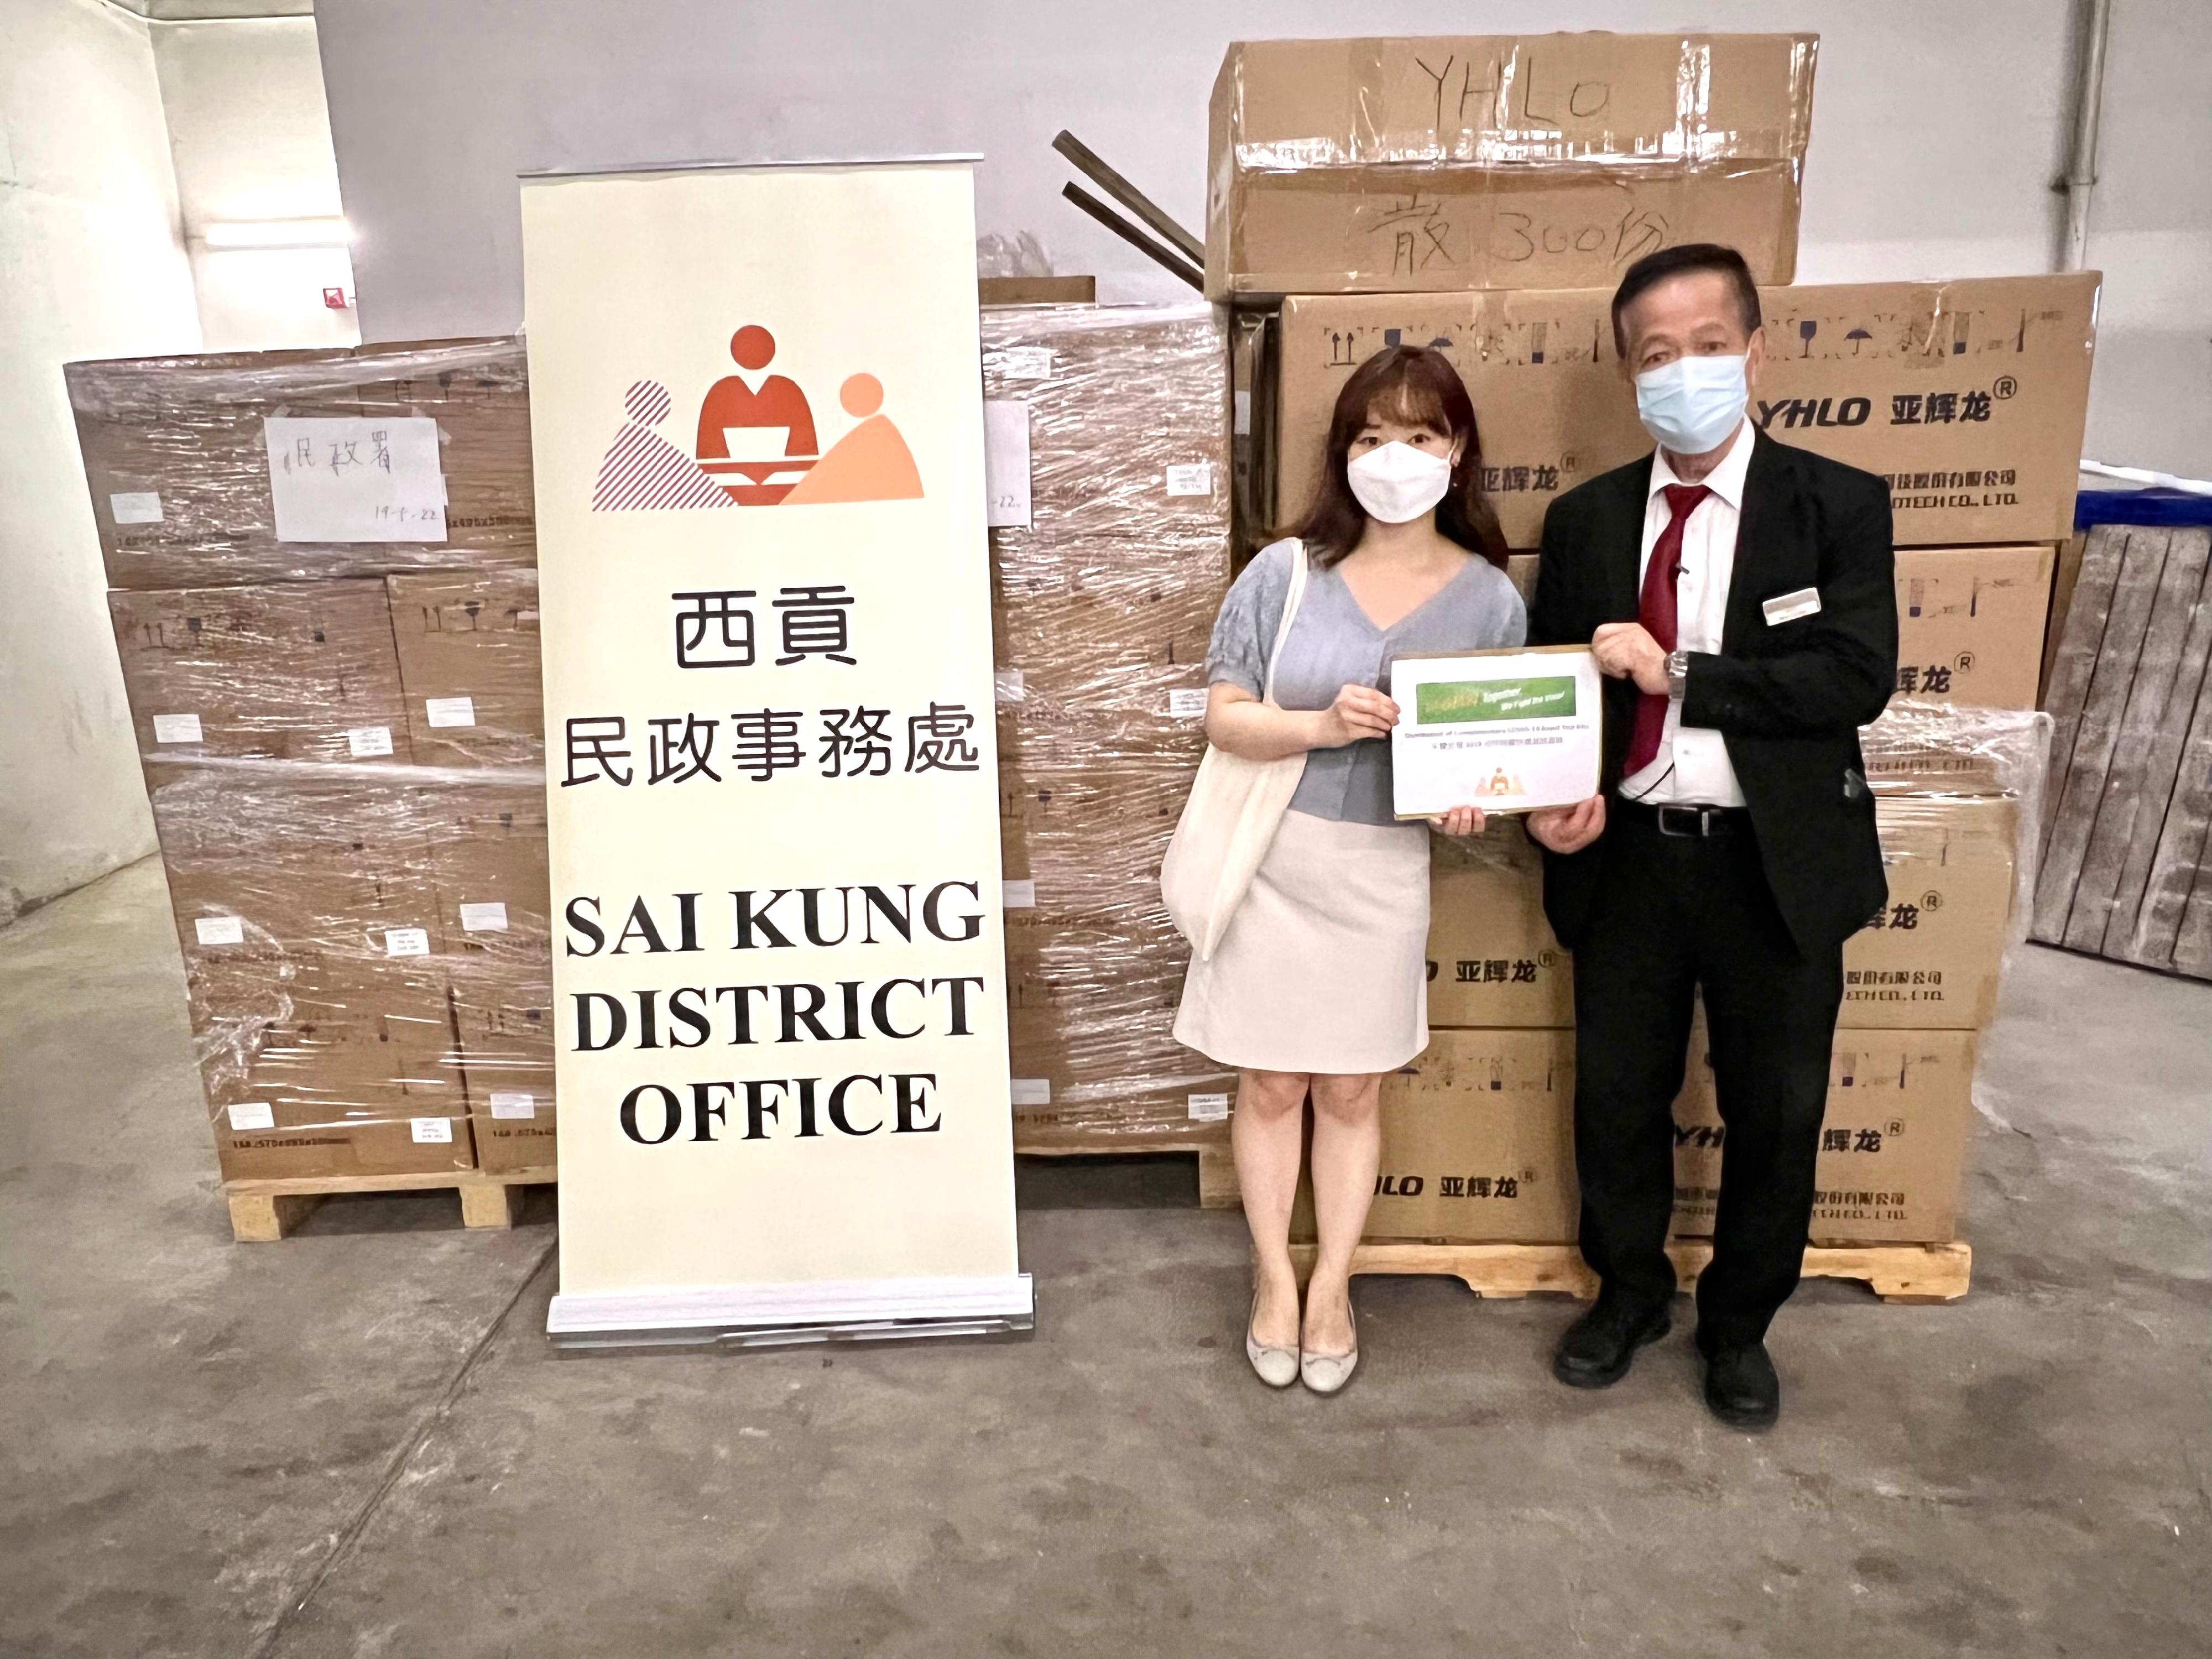 The Sai Kung District Office today (May 23) distributed COVID-19 rapid test kits to households, cleansing workers and property management staff living and working in Residence Oasis for voluntary testing through the property management company.